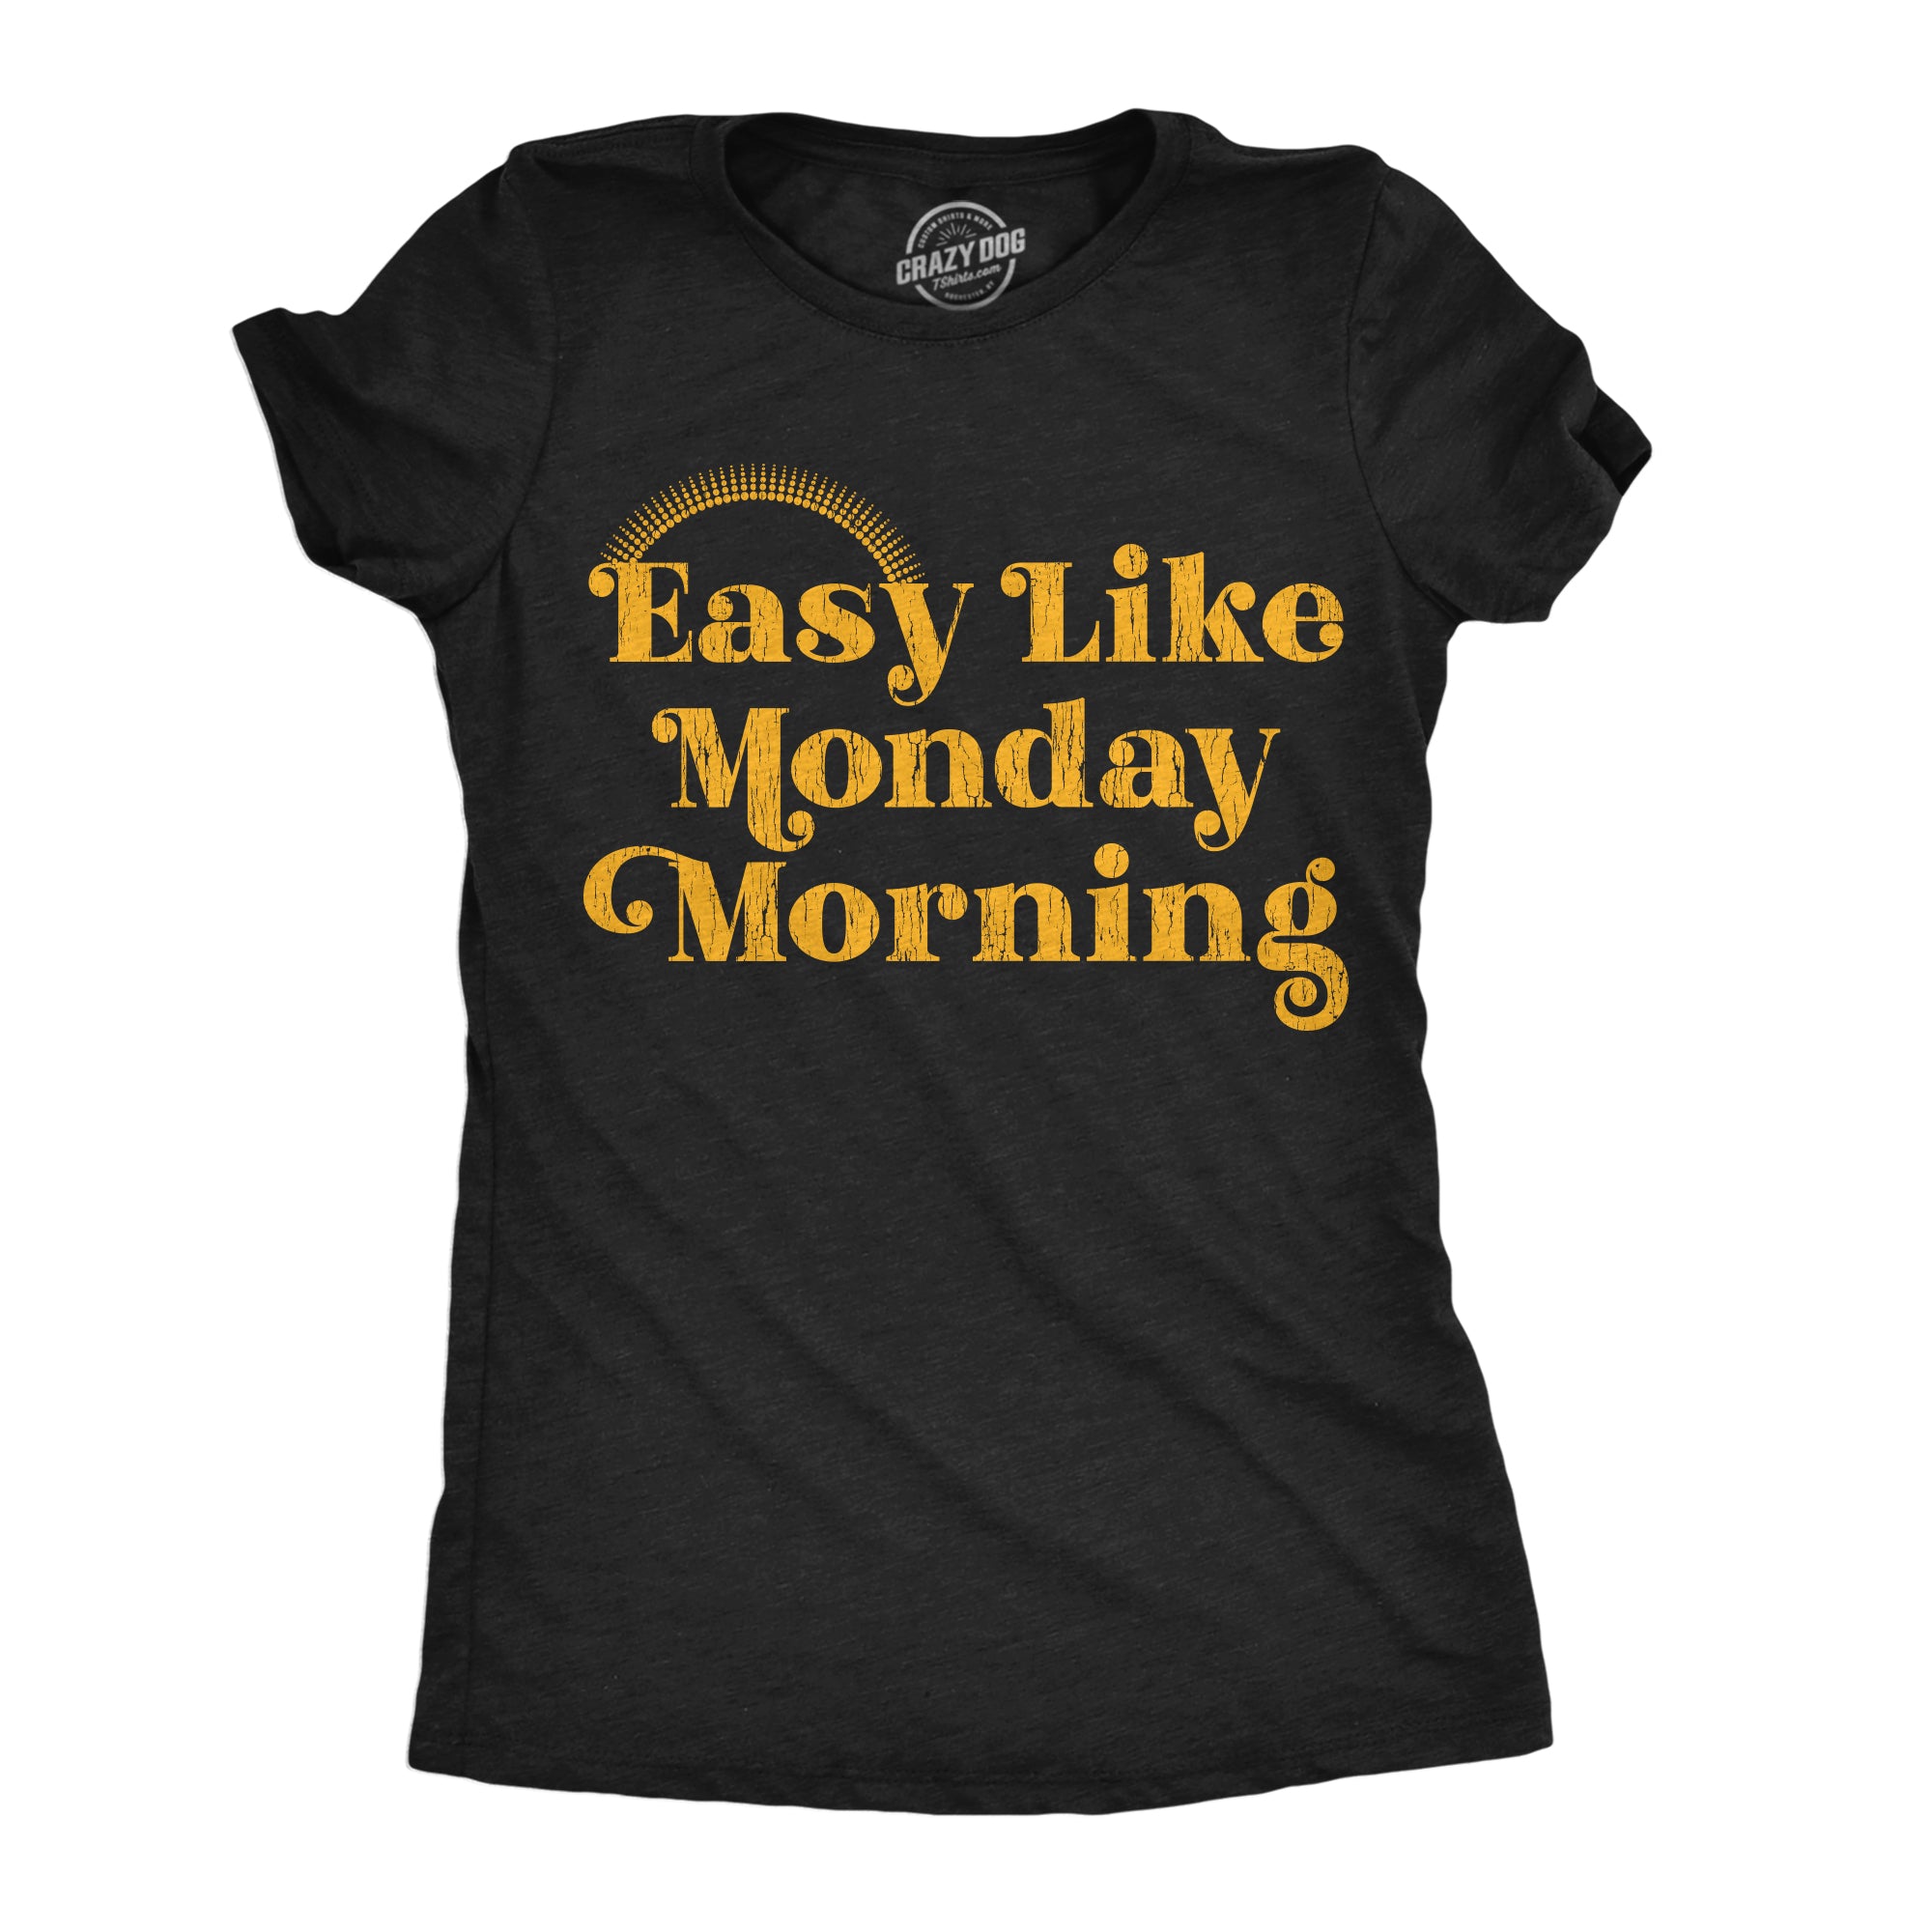 Funny Heather Black - Easy Like Monday Morning Easy Like Monday Morning Womens T Shirt Nerdy Sarcastic Office Tee